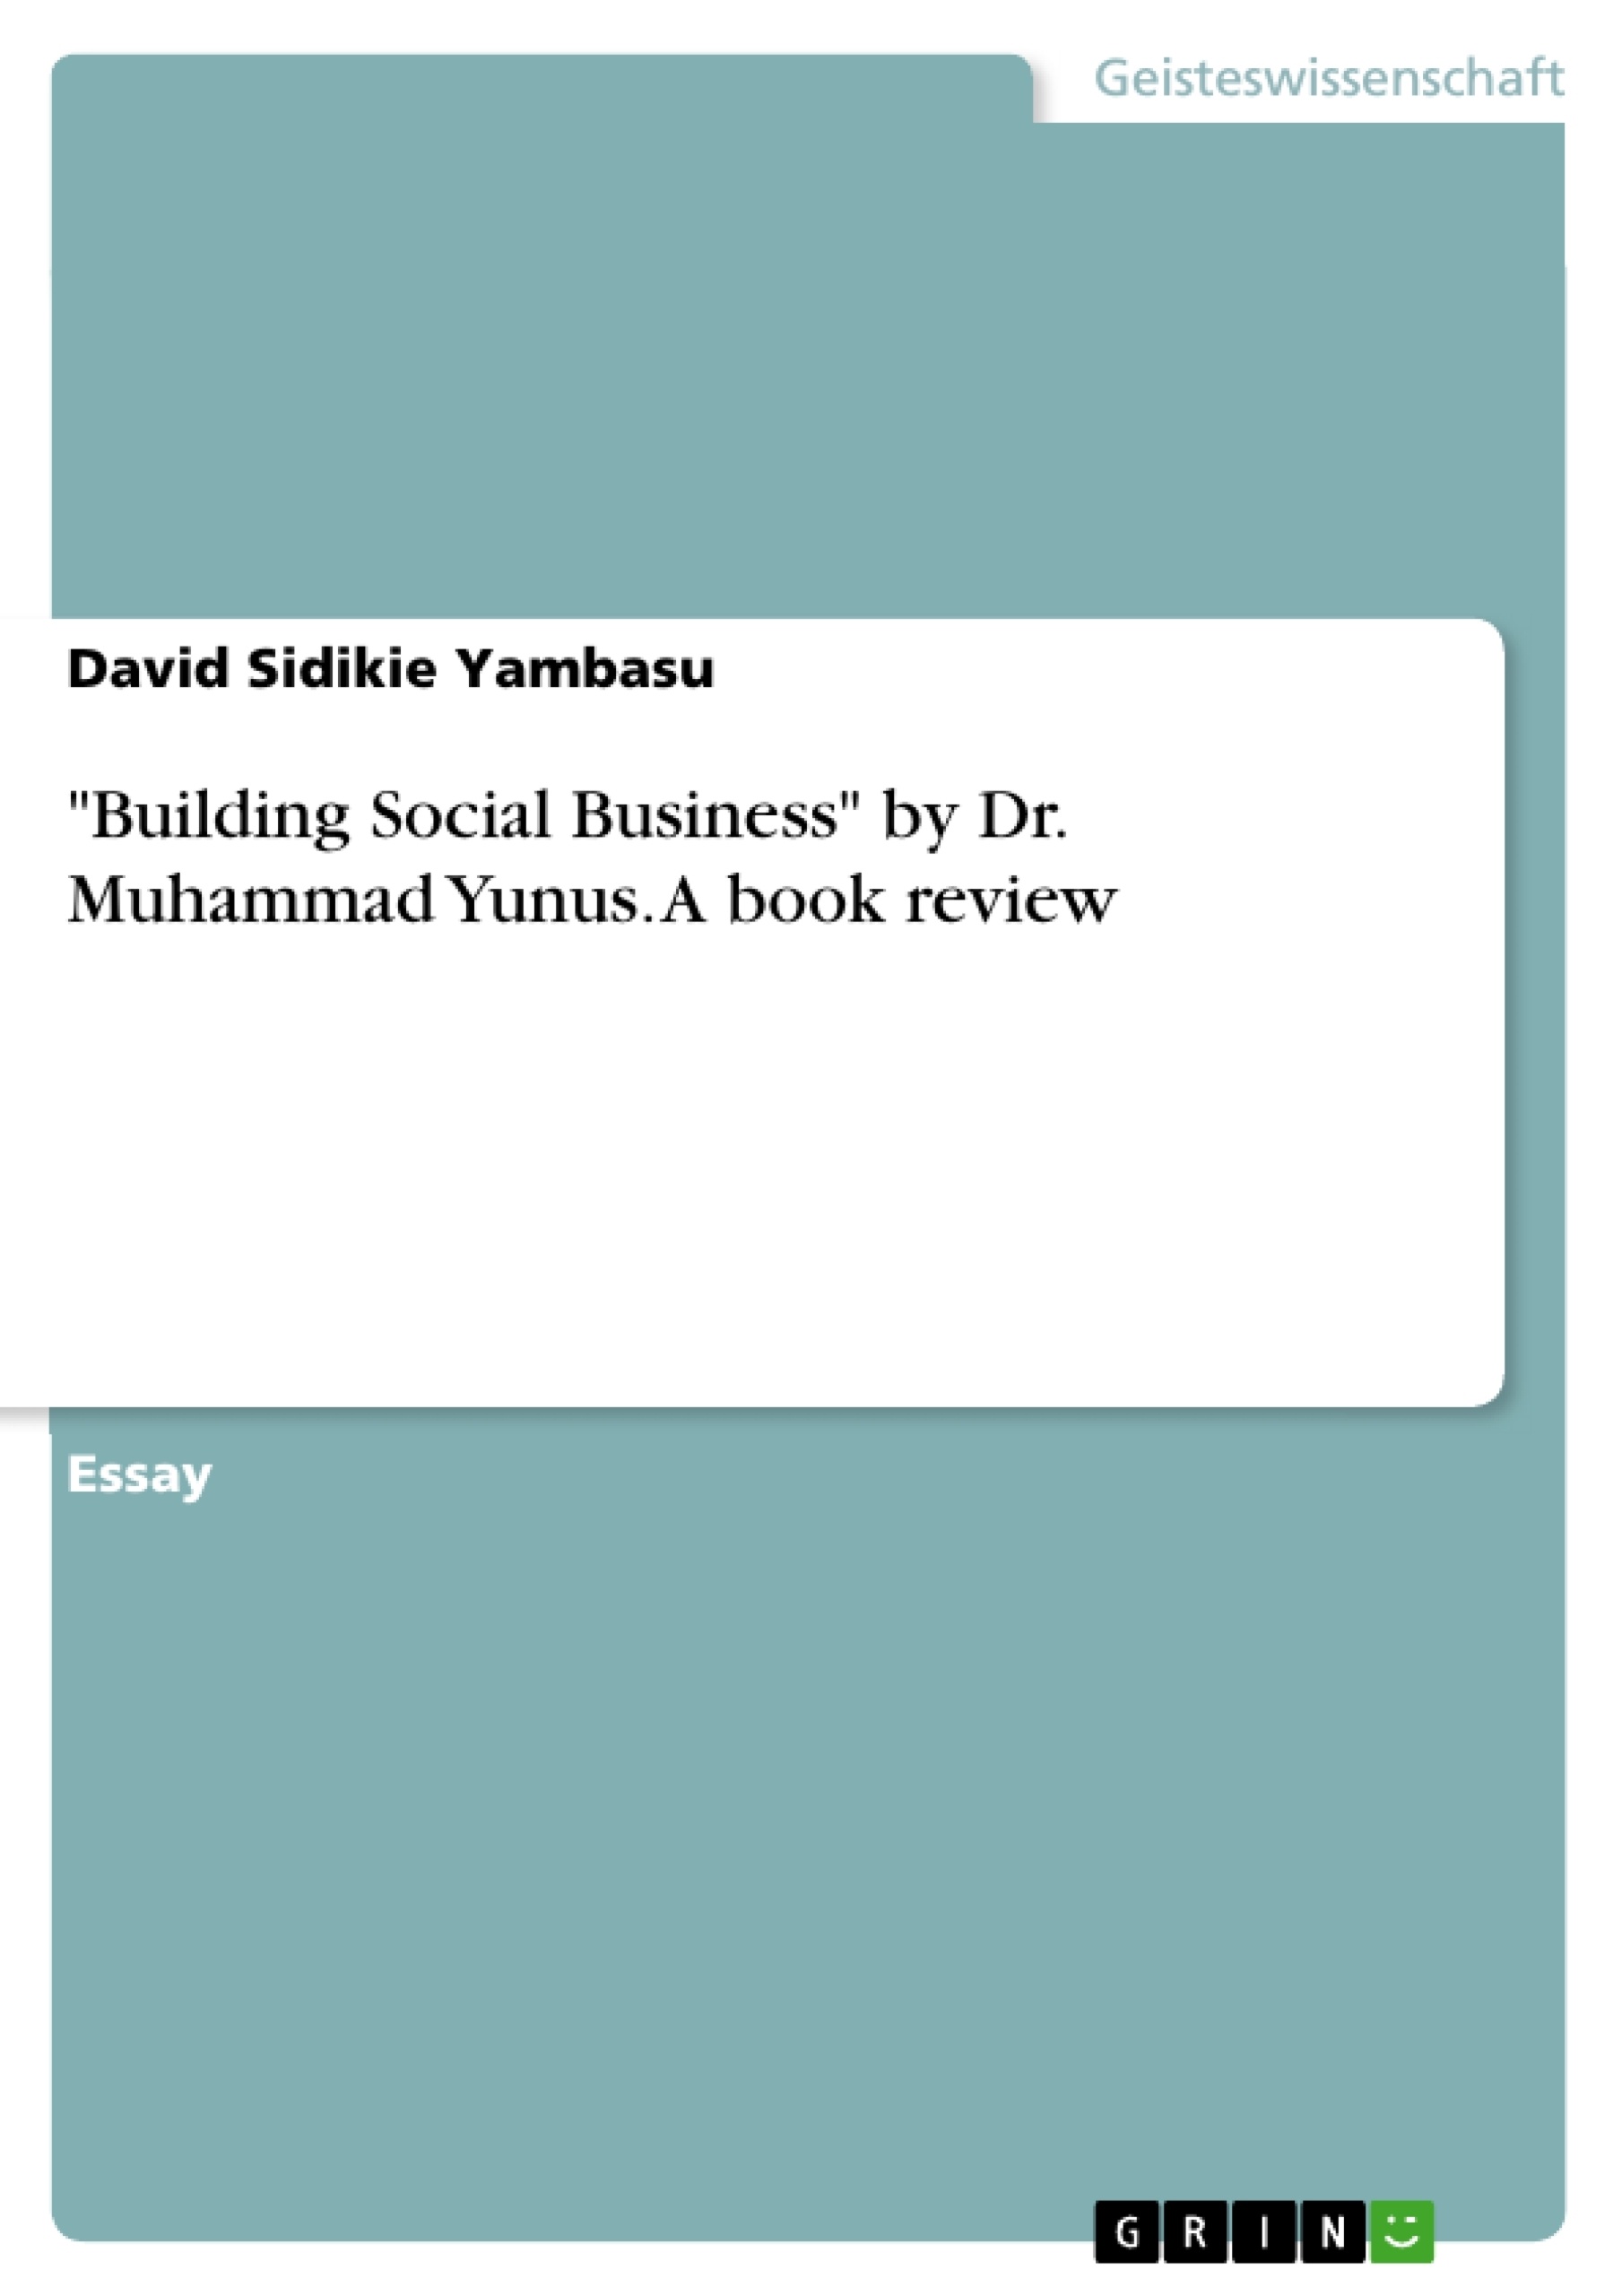 Título: "Building Social Business" by Dr. Muhammad Yunus. A book review